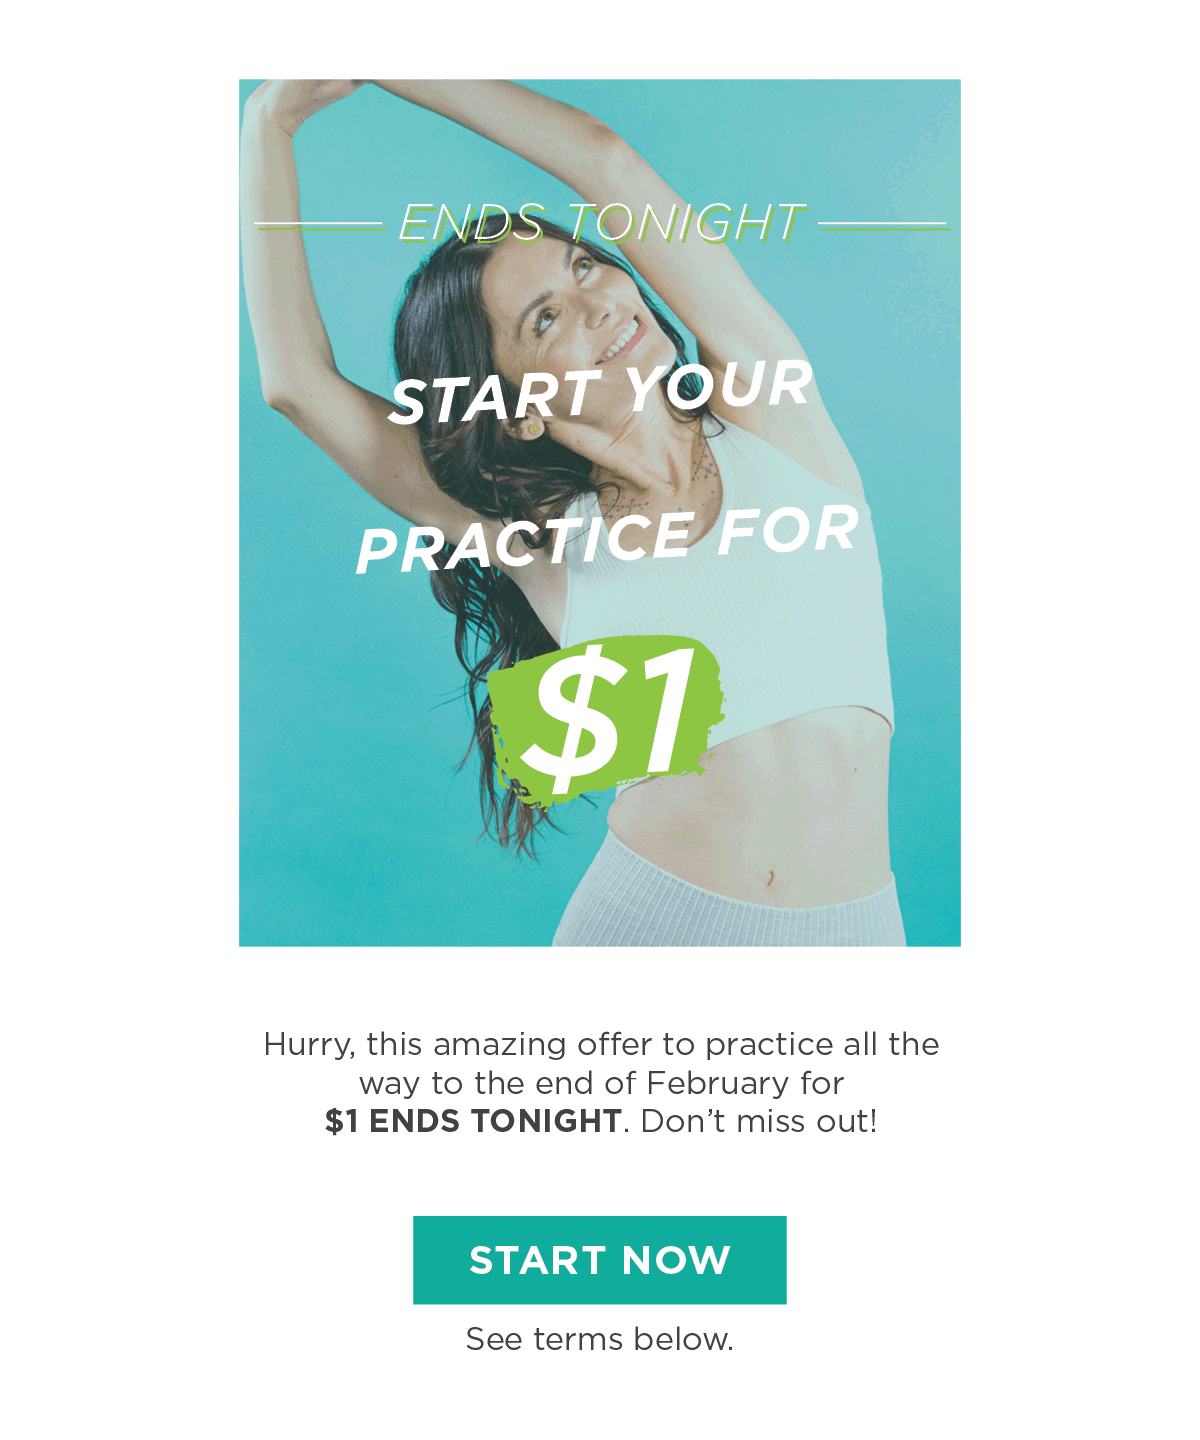 Start your practice for $1